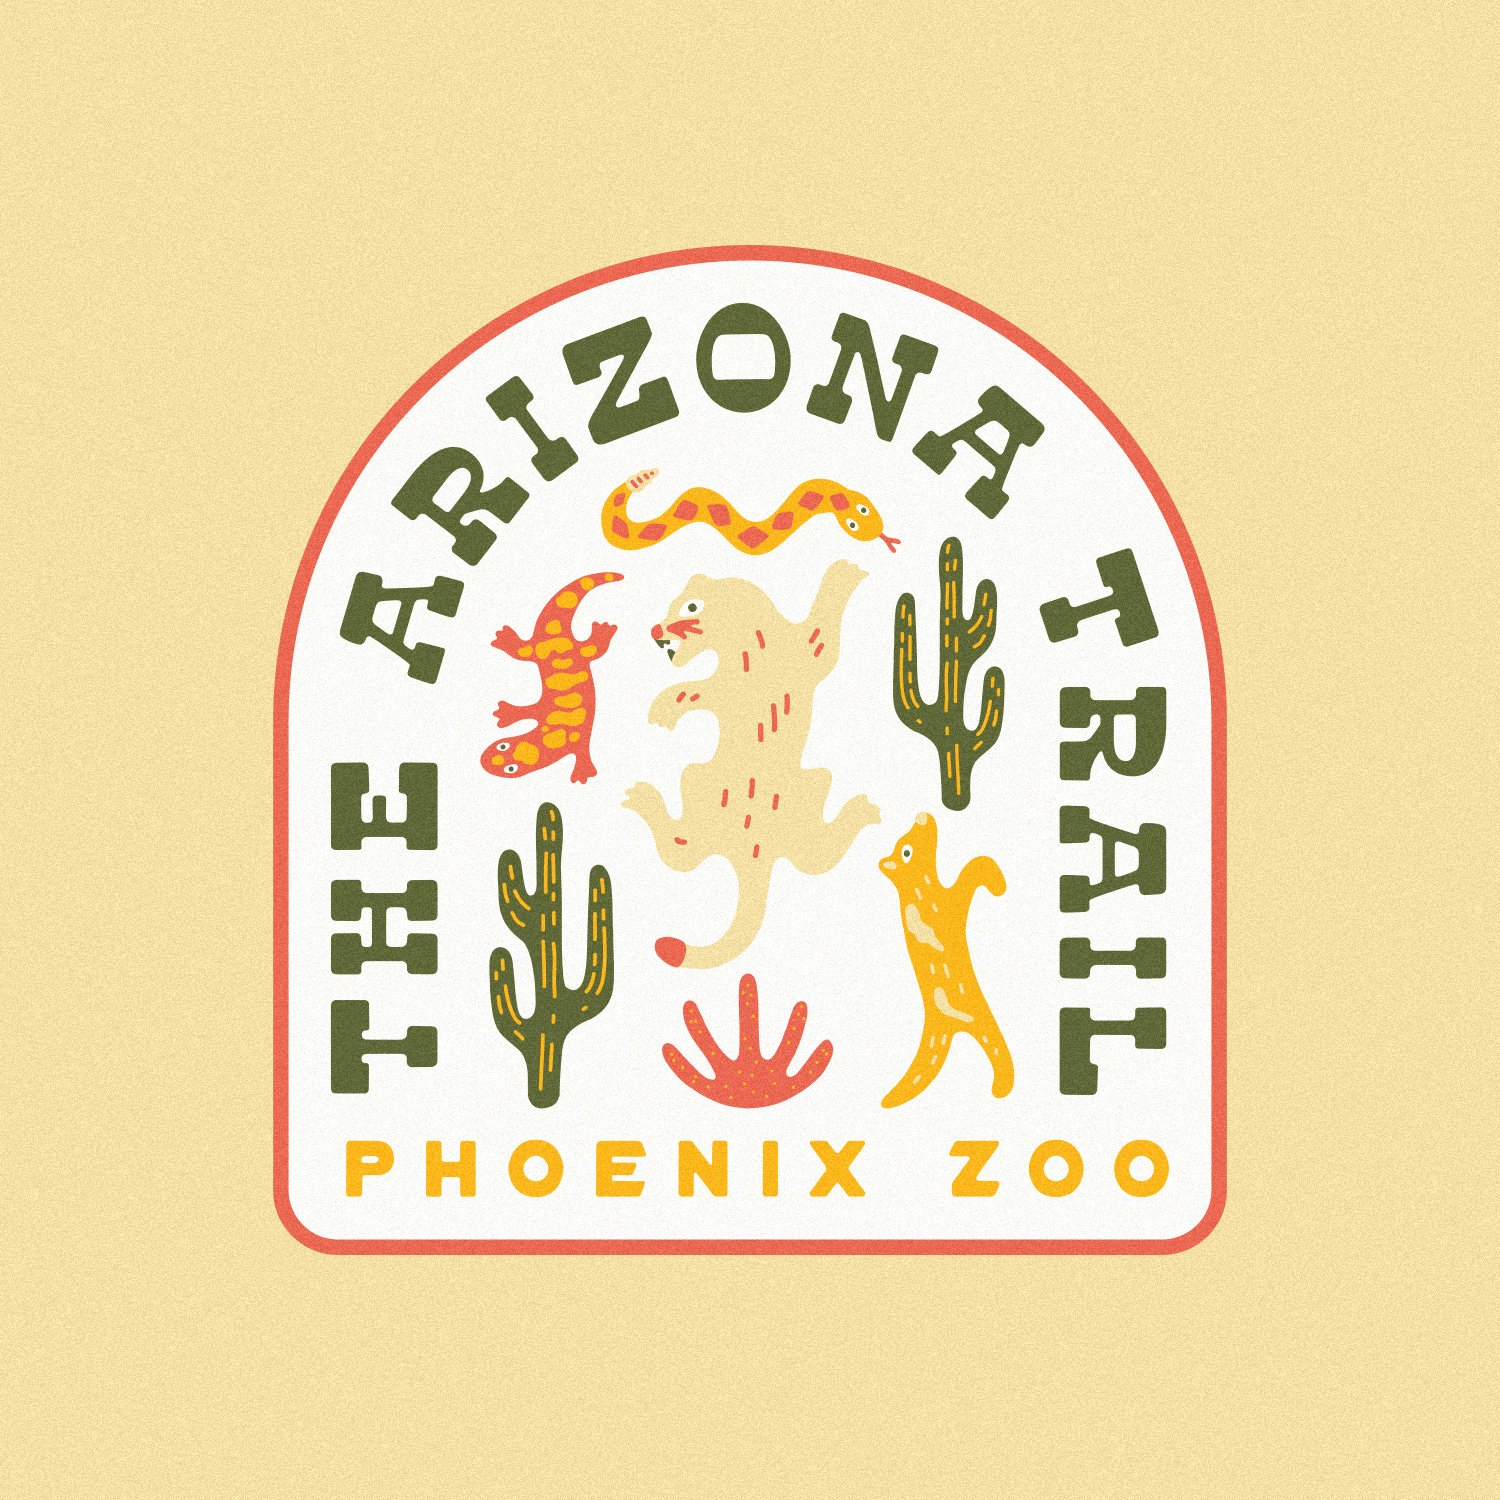  The Arizona Trail at the Phoenix Zoo illustration design by Cactus Country. 